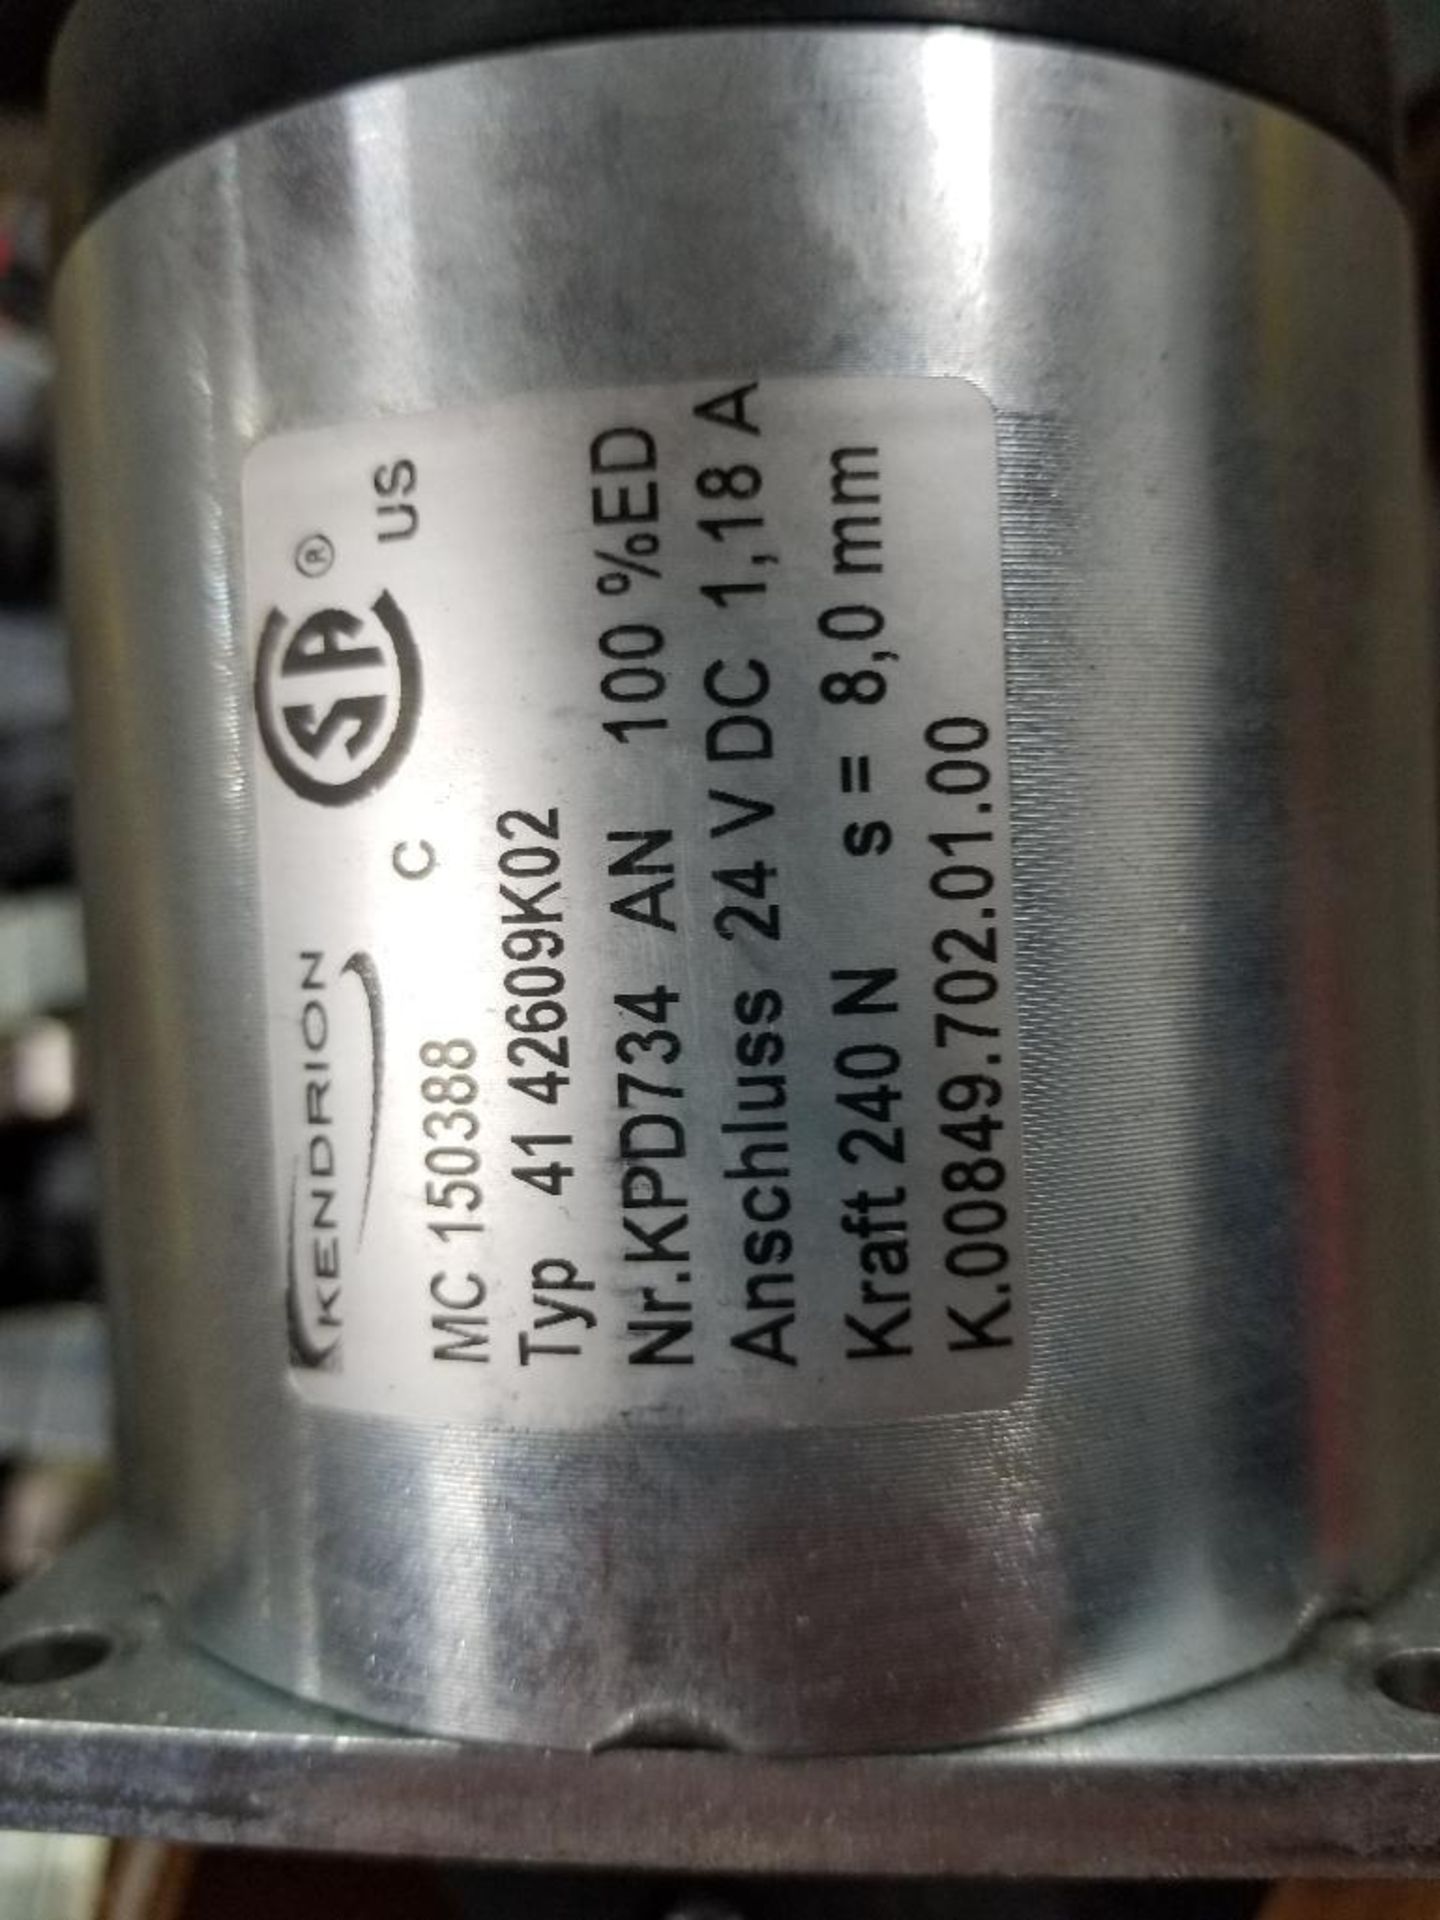 Qty 4 - Kendrion solenoid actuator. Part number 41-42609K02. - Image 4 of 4